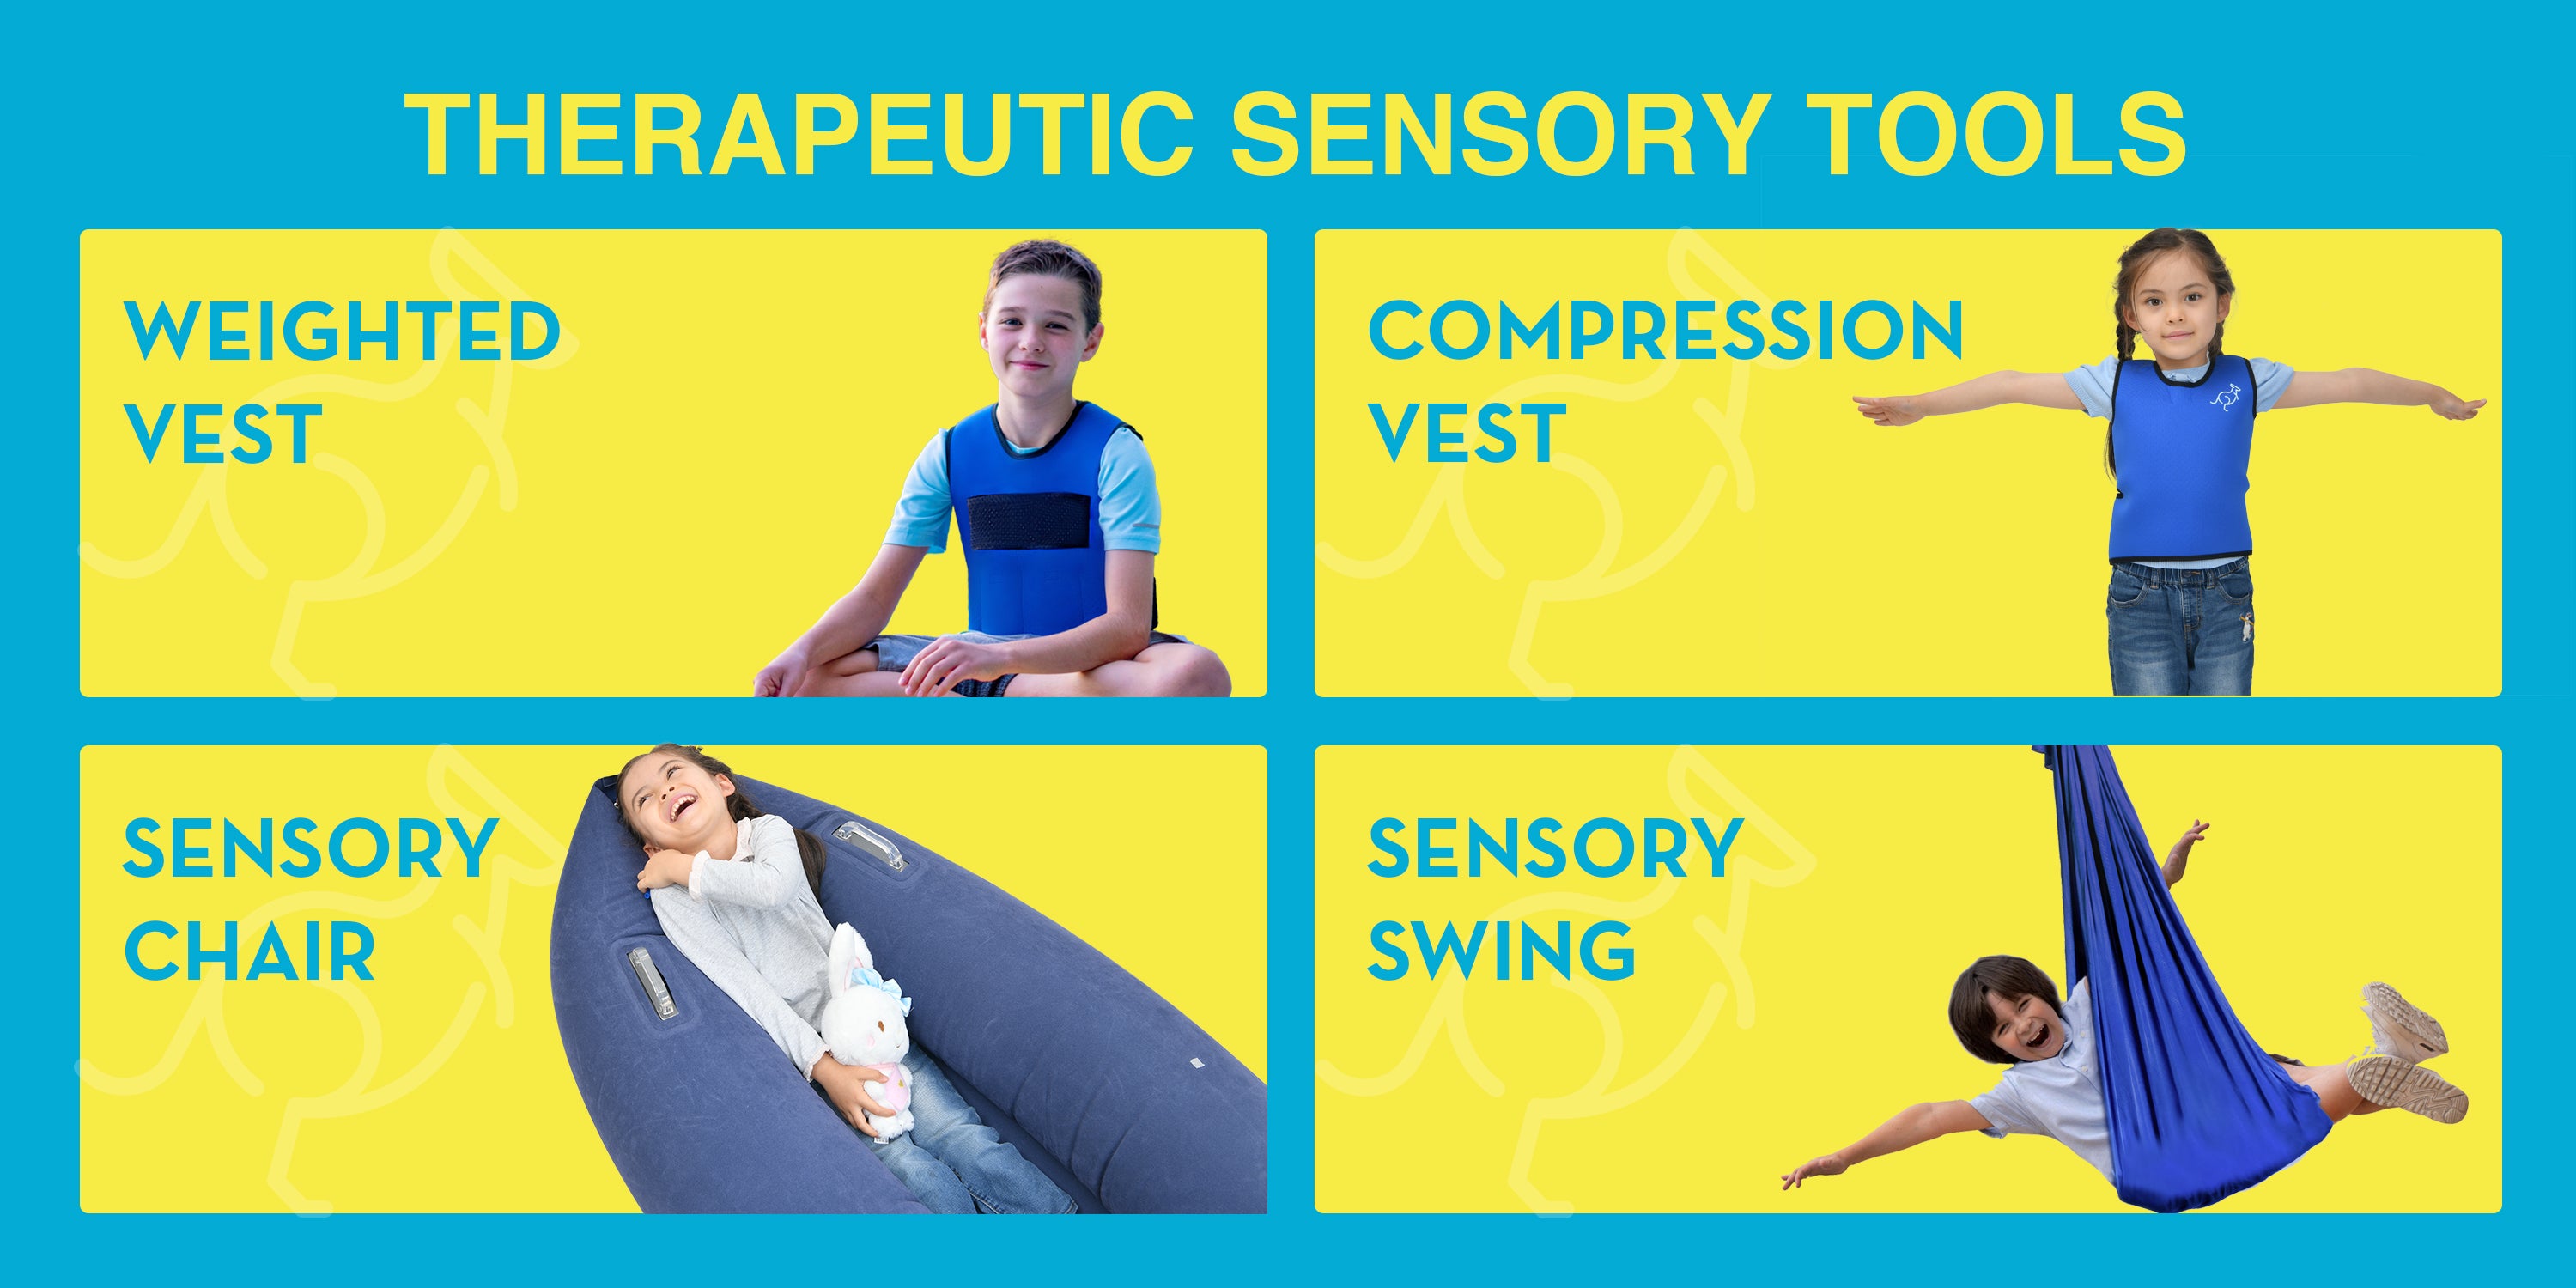 Therapeutic Sensory Products For kids Compression Vest for Kids with Autism, Sensory Compression Vest for Kids with Processing Disorders, ADHD, and Autism, Calming and Supportive